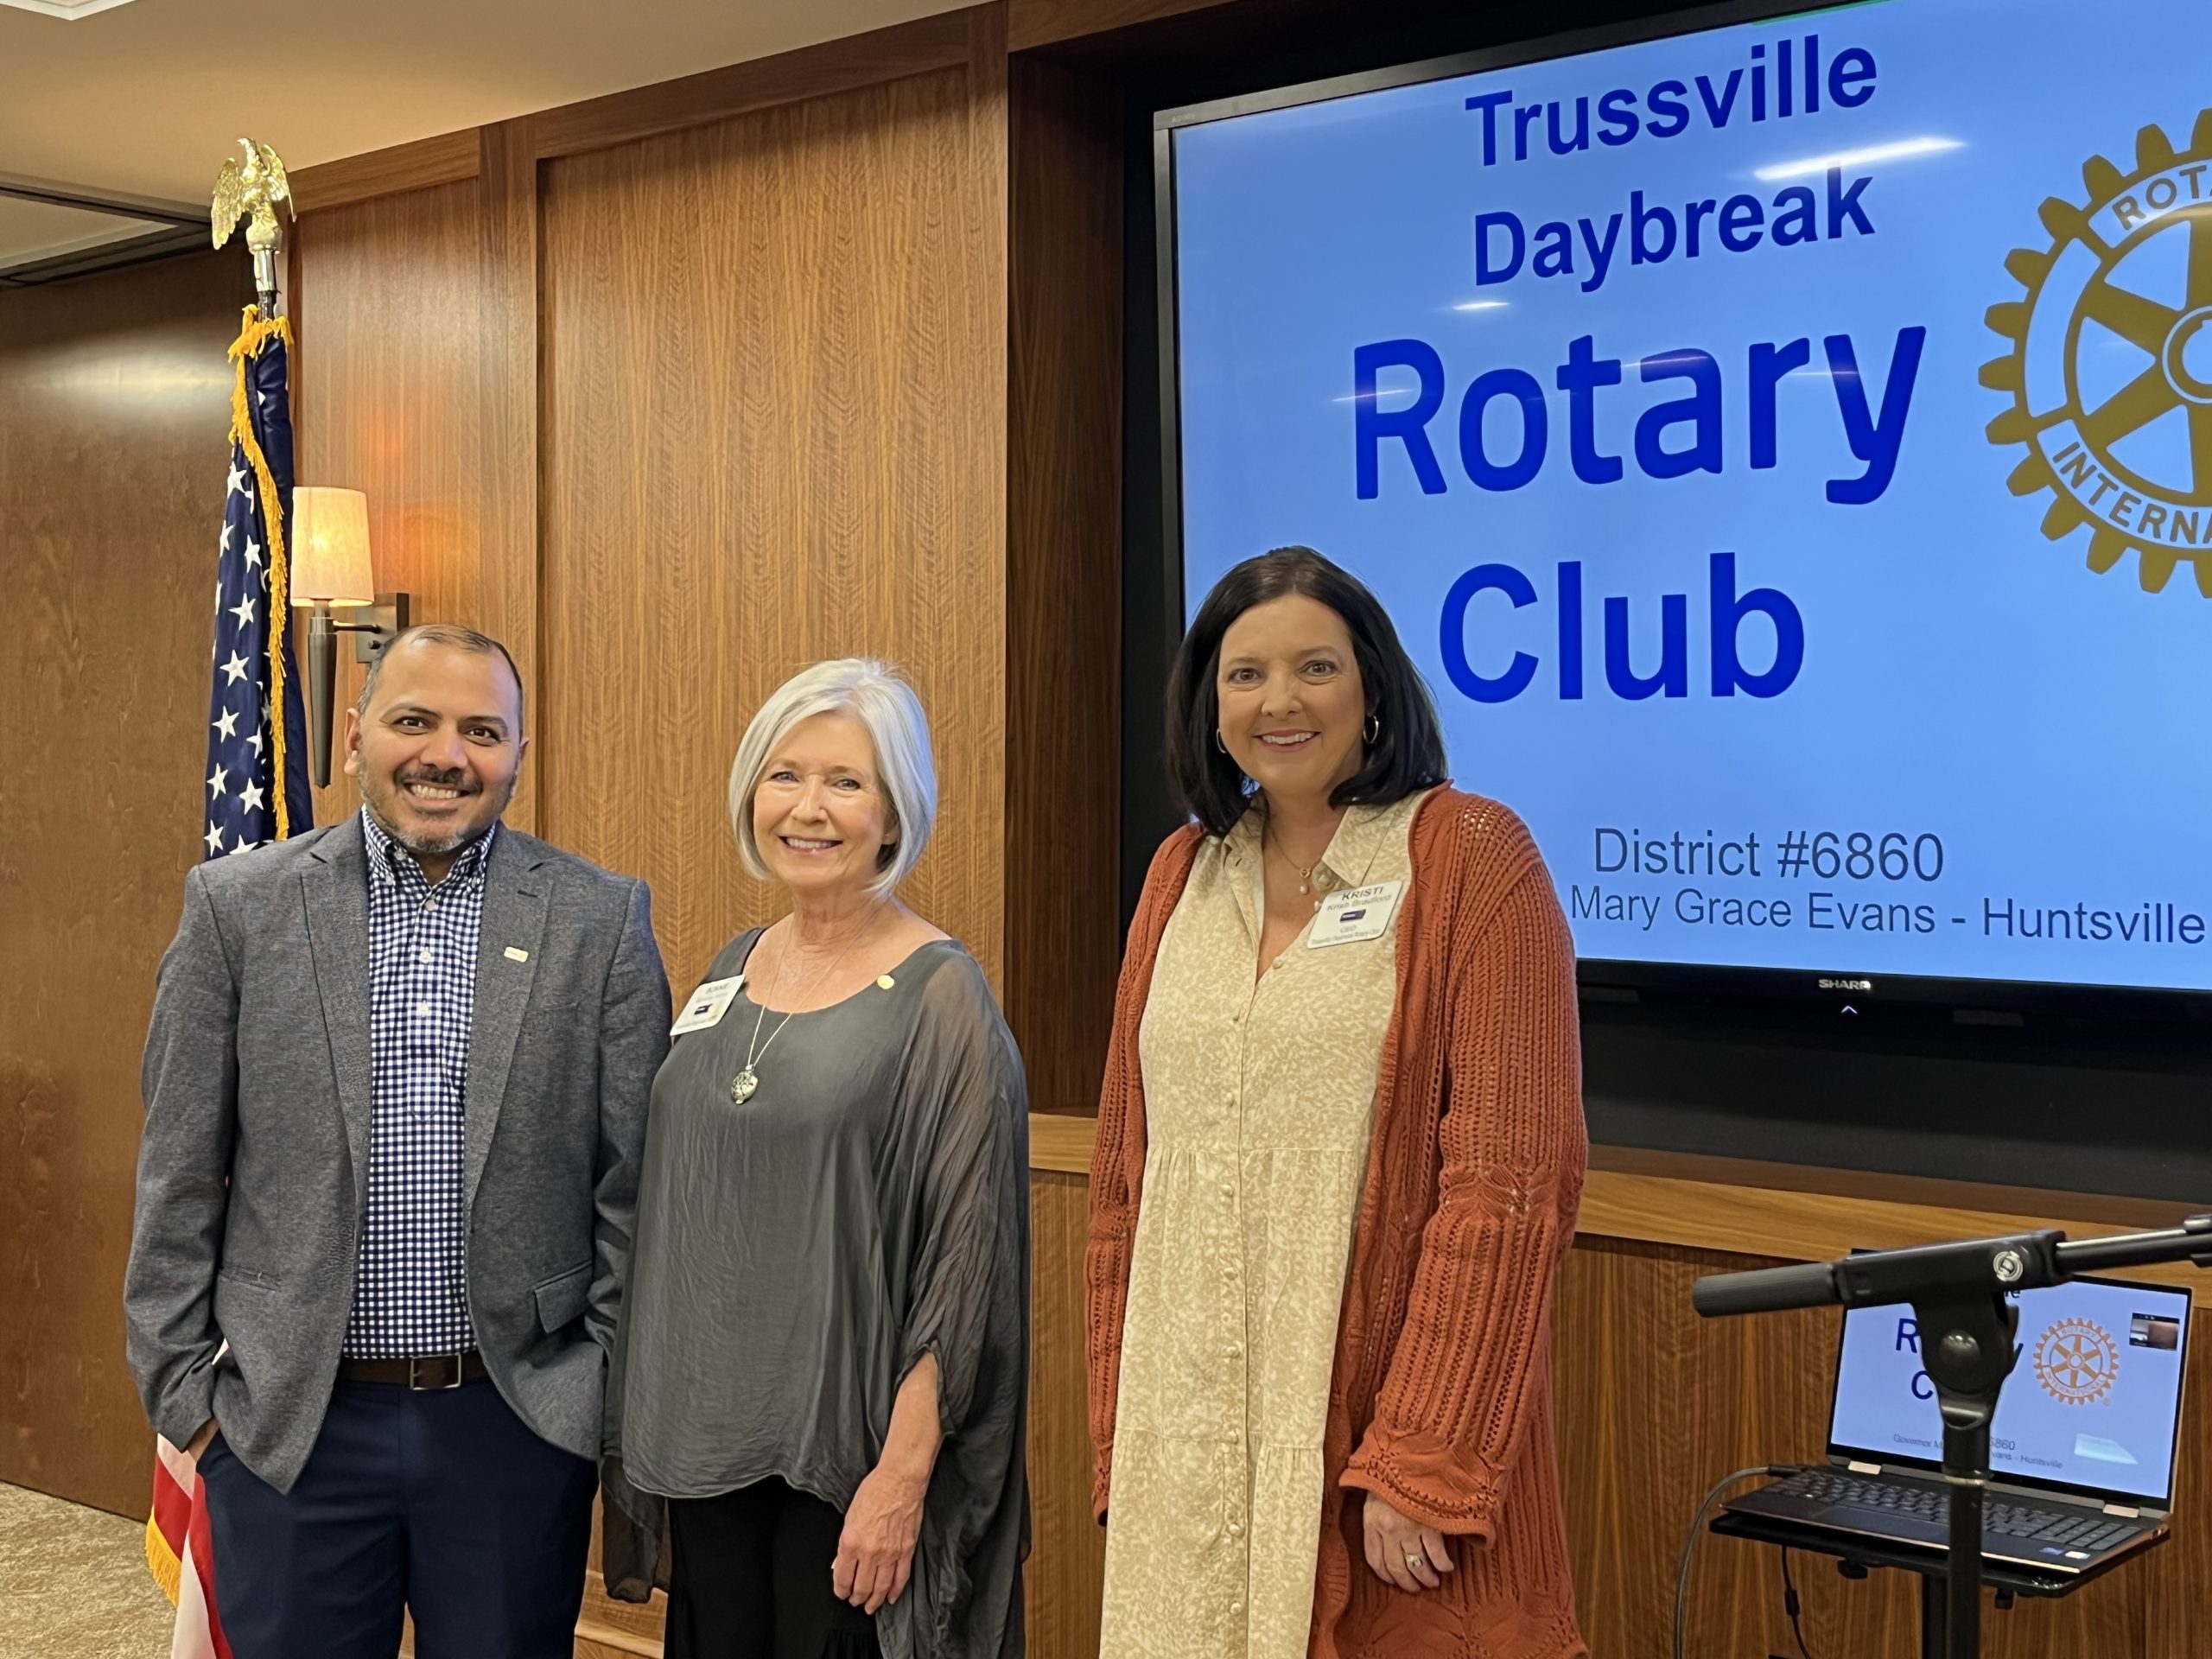 Trussville Rotary Daybreak Club inducts new member